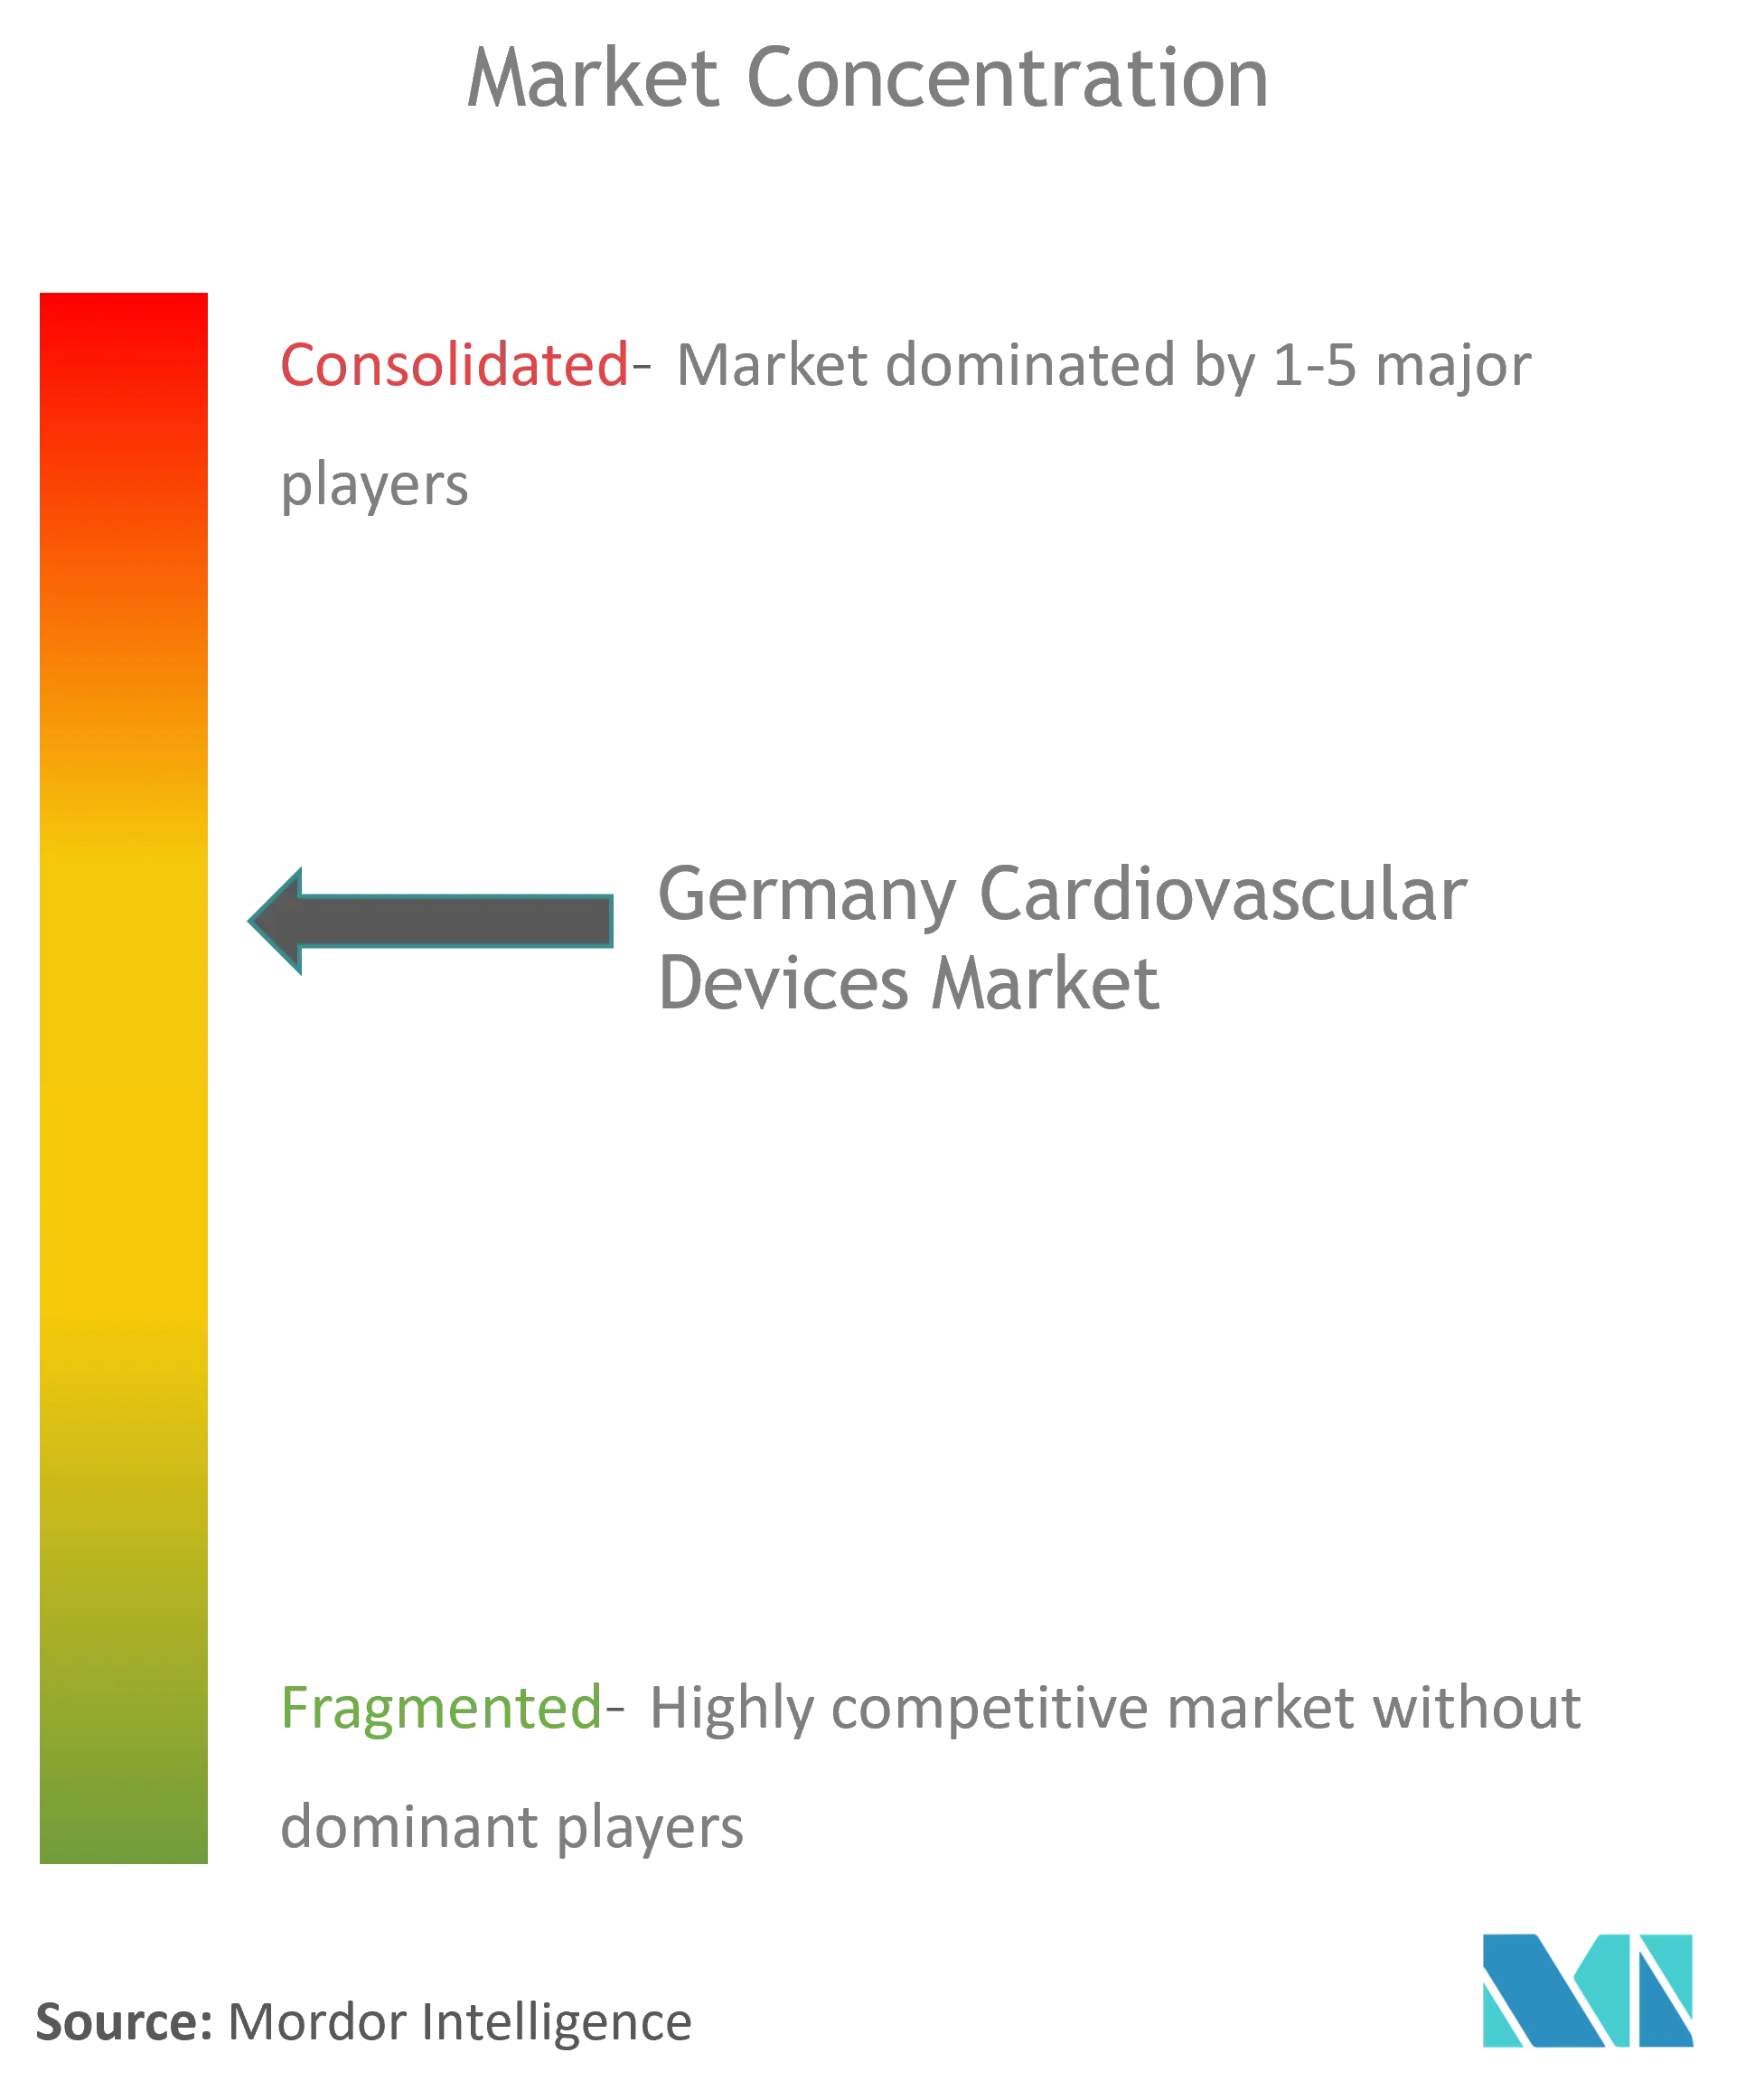 Germany Cardiovascular Devices Market Concentration